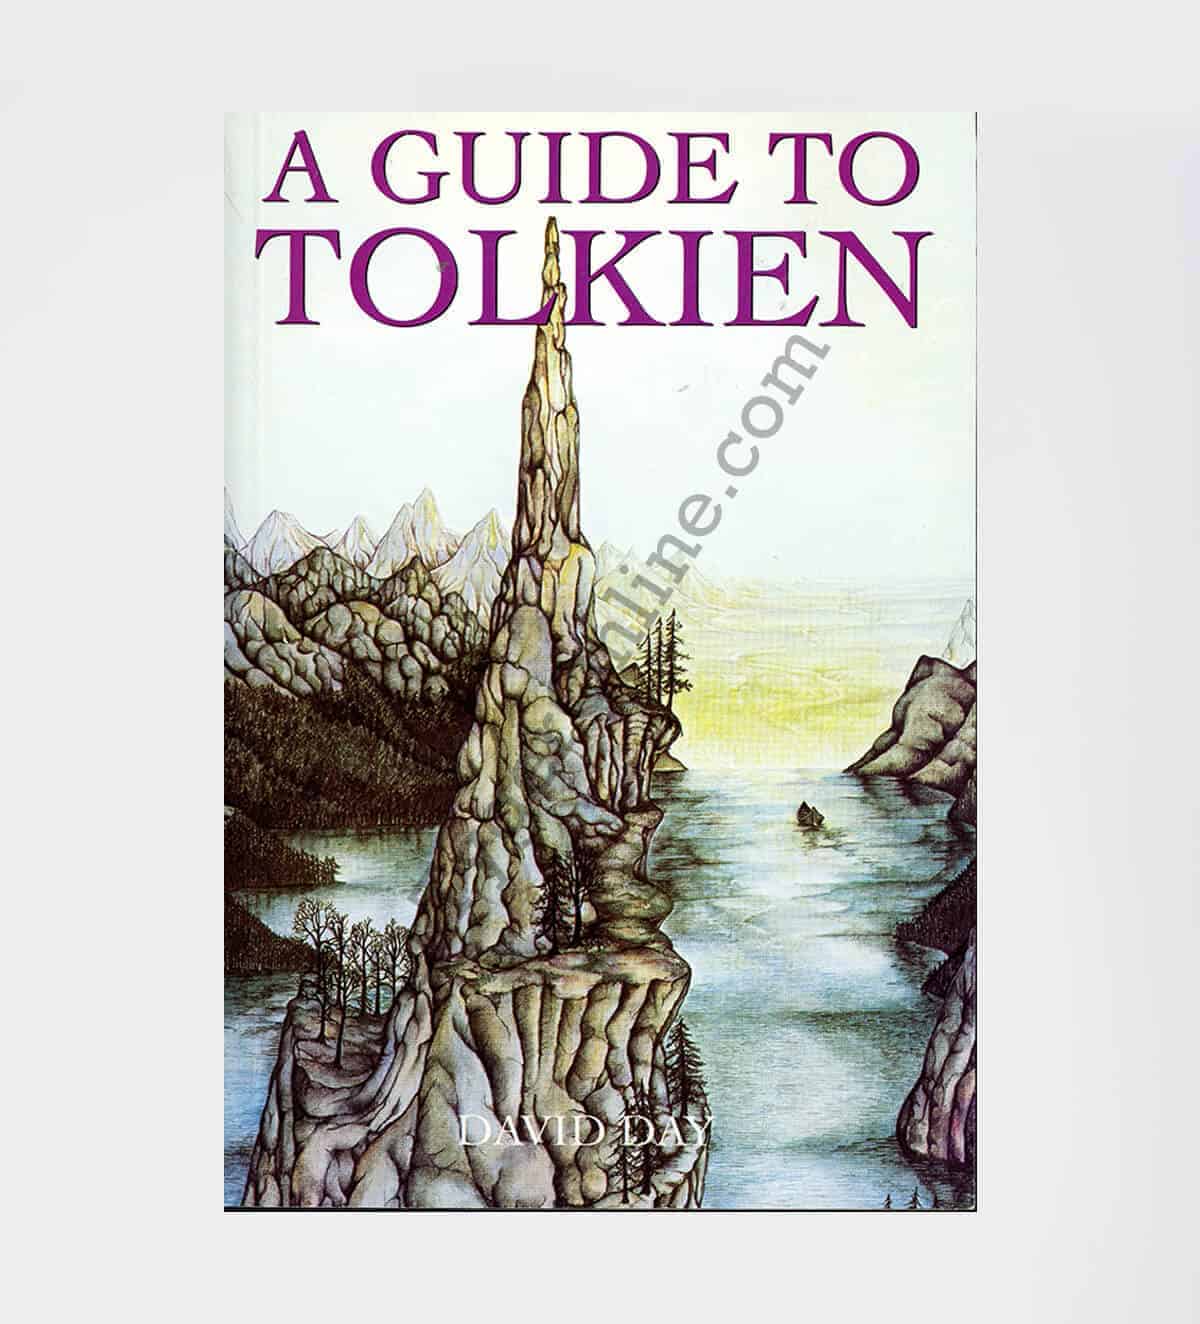 A Guide to Tolkien: by David Day